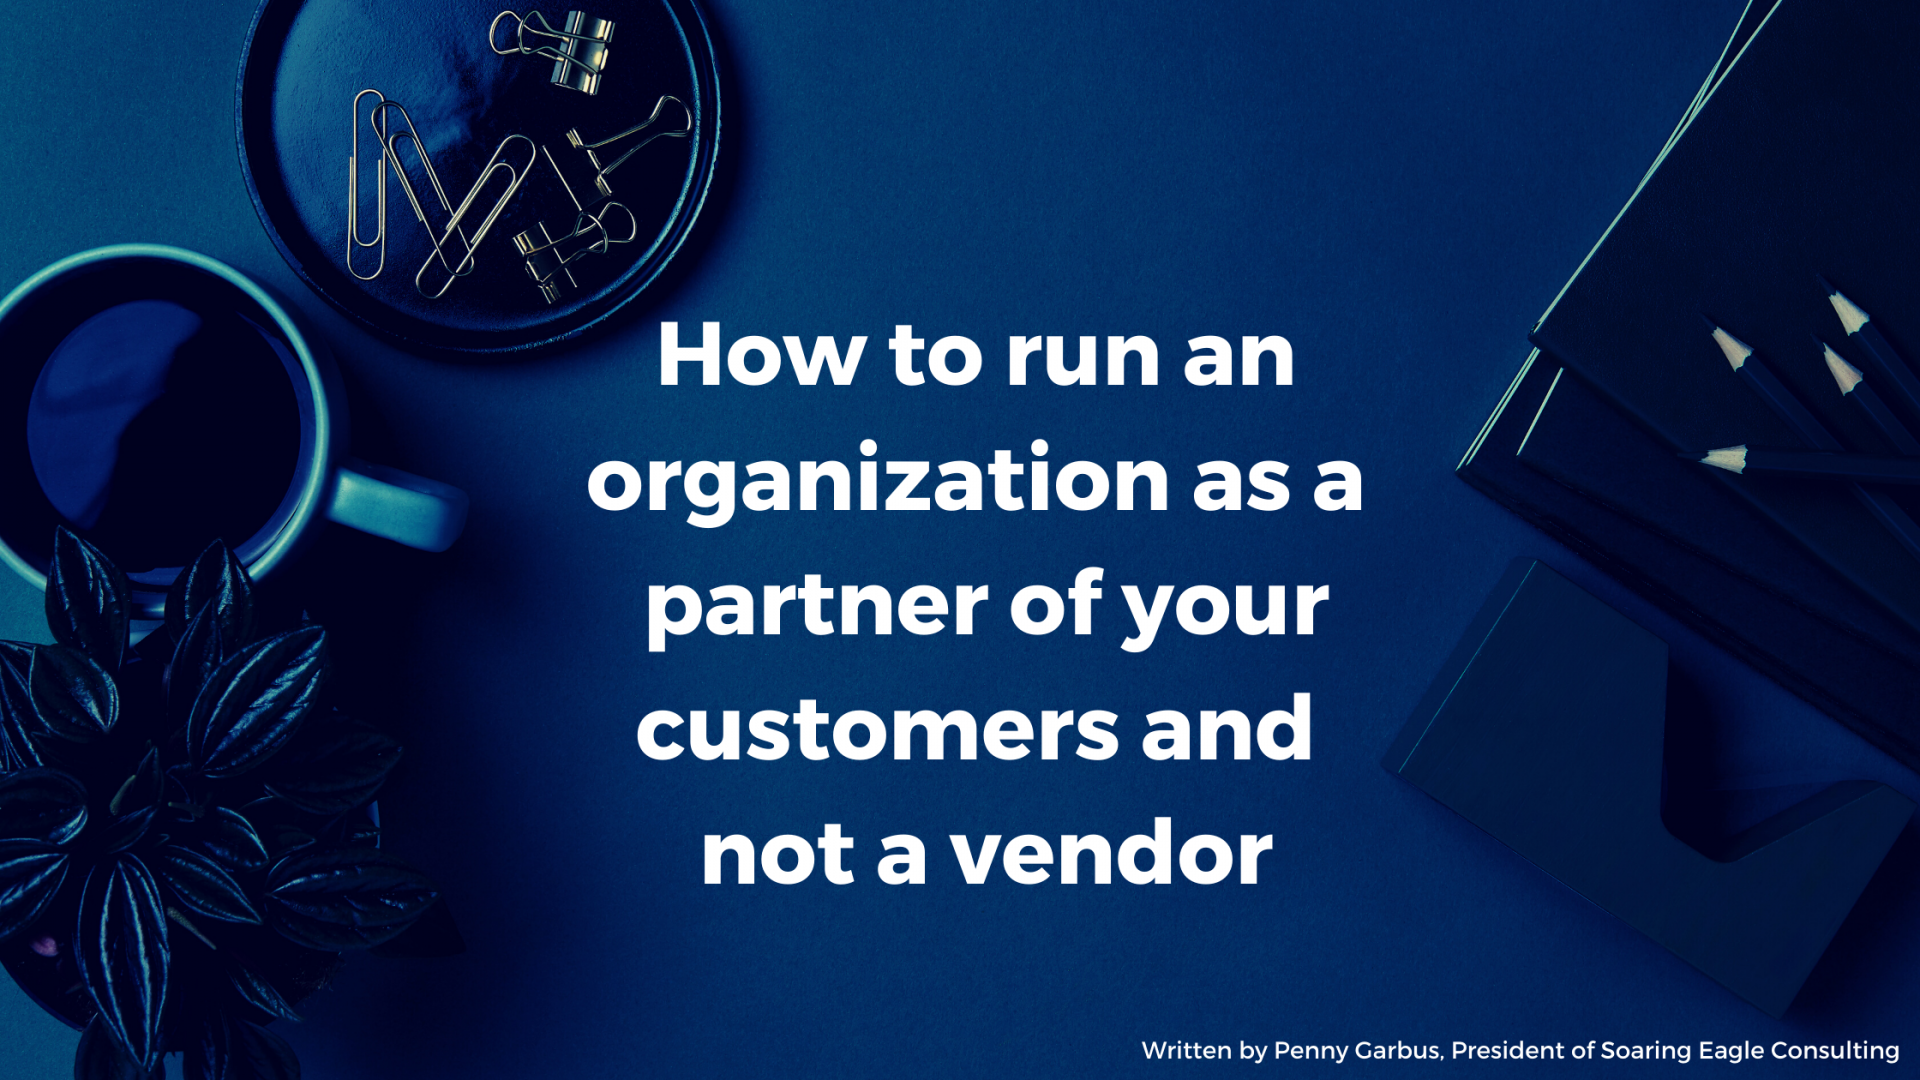 HOW TO RUN AN ORGANIZATION AS A PARTNER OF YOUR CUSTOMERS AND NOT A VENDOR